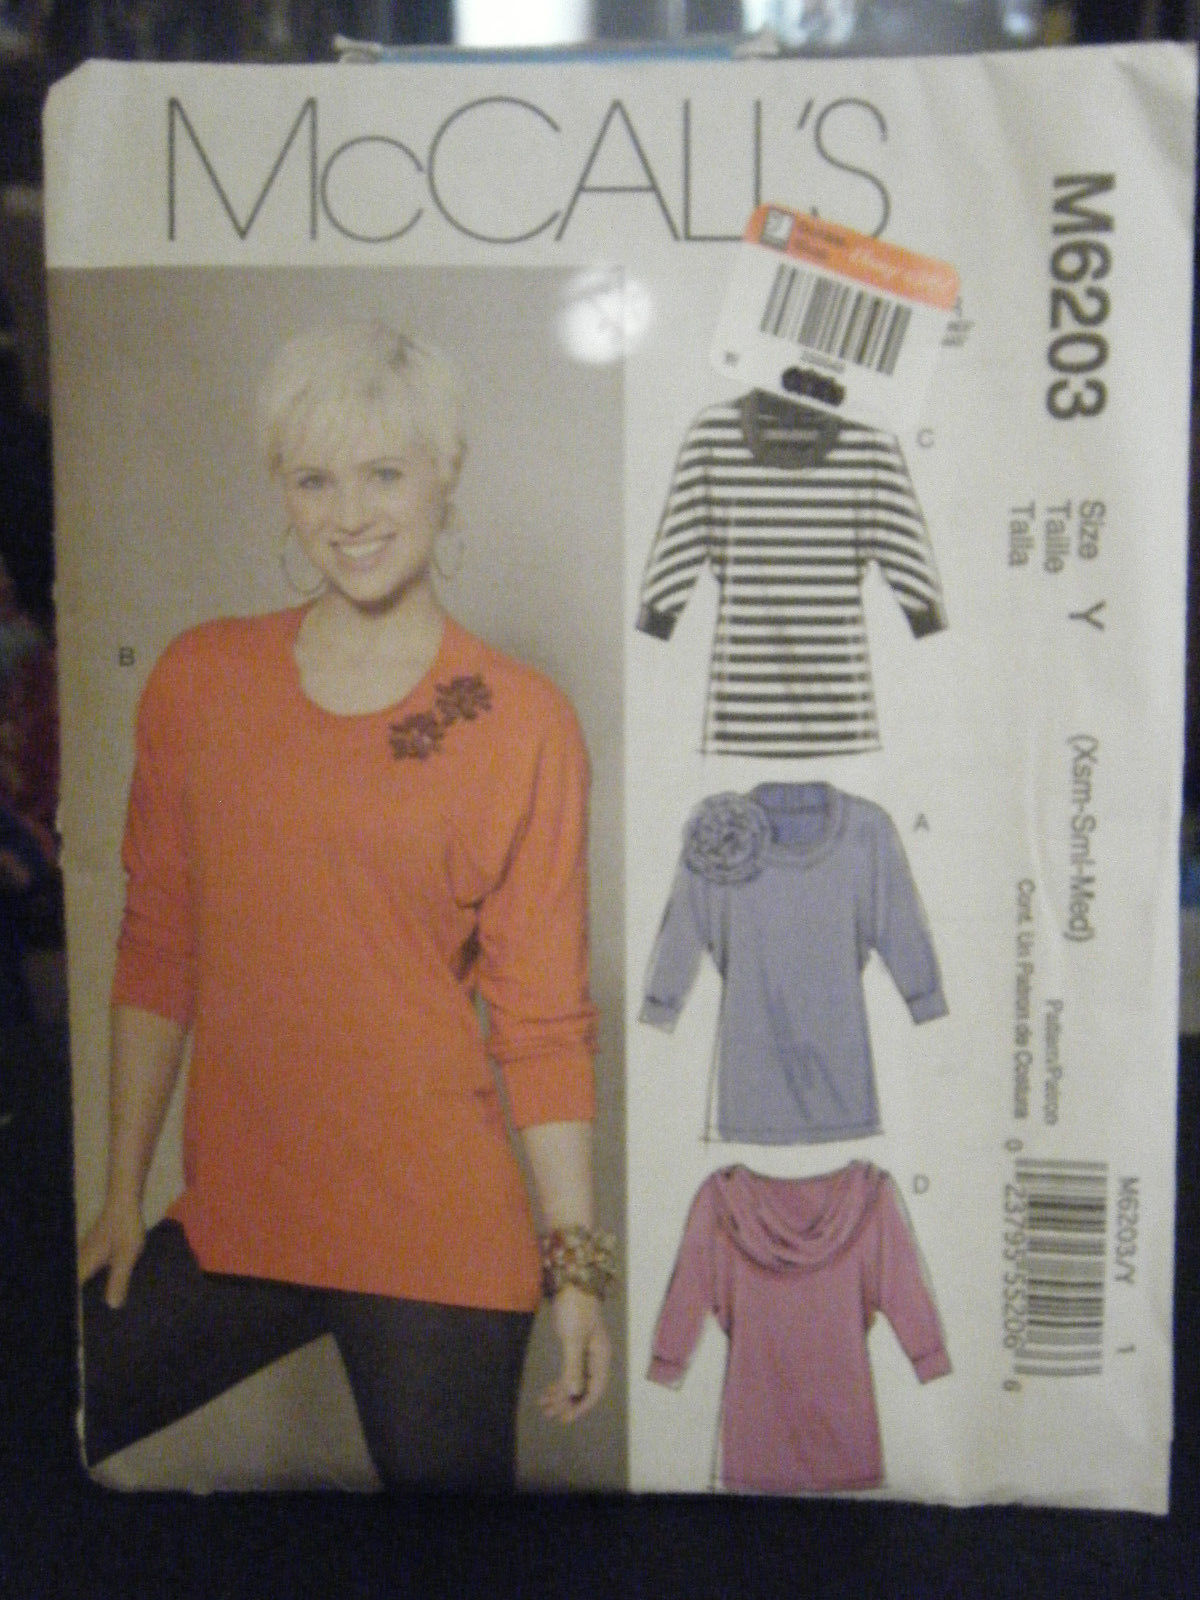 Primary image for McCall's M6203 Misses Tunics Pattern - Size XS/S/M